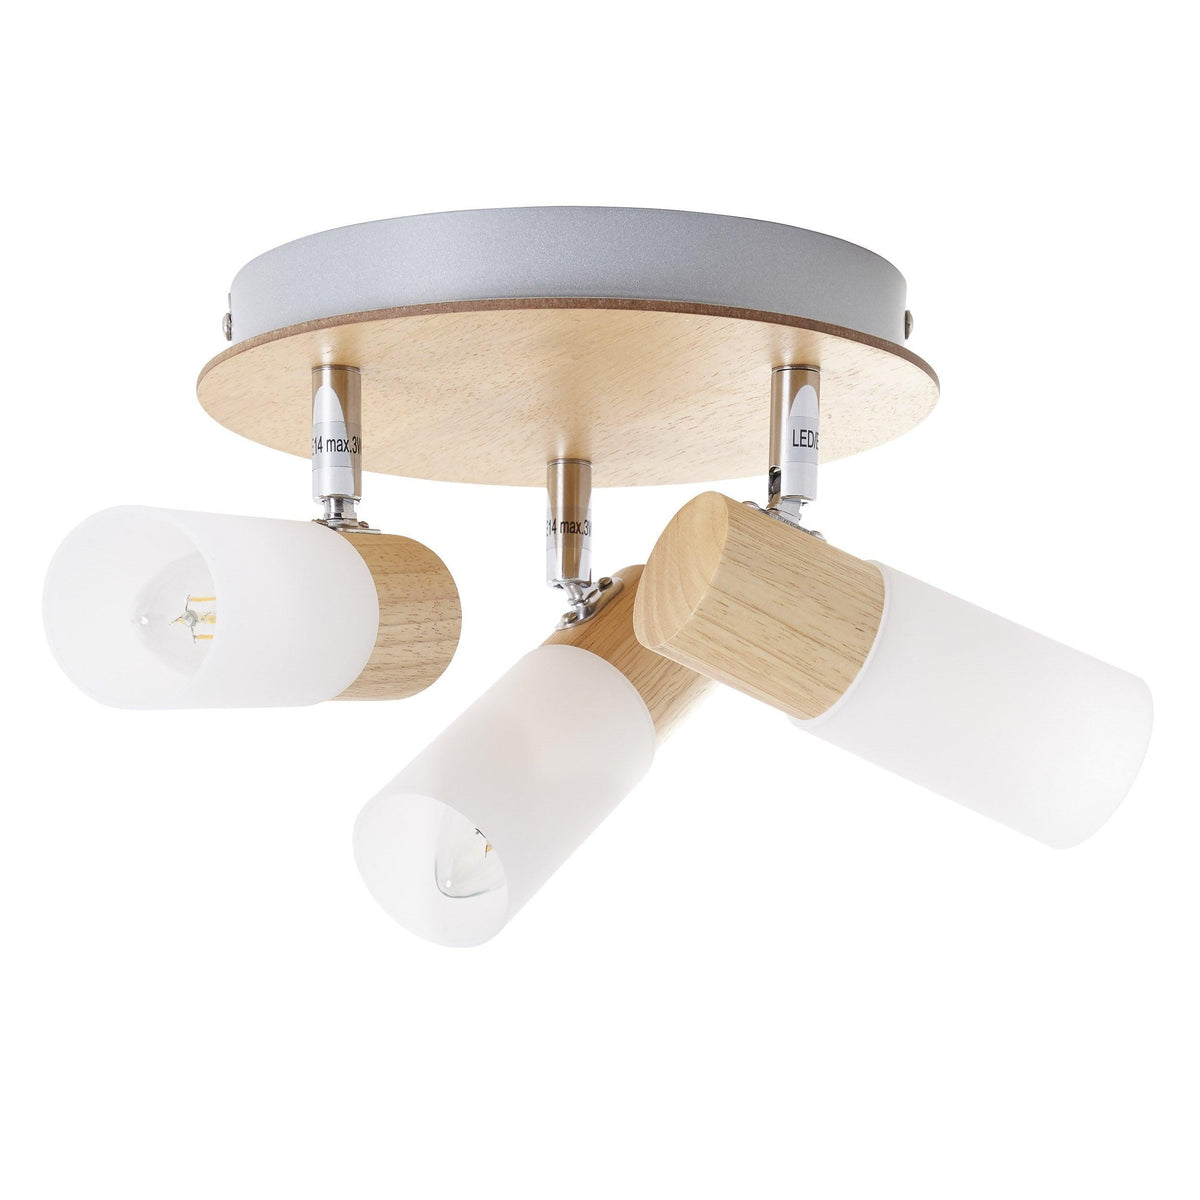 Brilliant 3 Light 10.5W Babsan Round Spotlight - Wood Light &amp; White | 51434/50 from DID Electrical - guaranteed Irish, guaranteed quality service. (6977595605180)